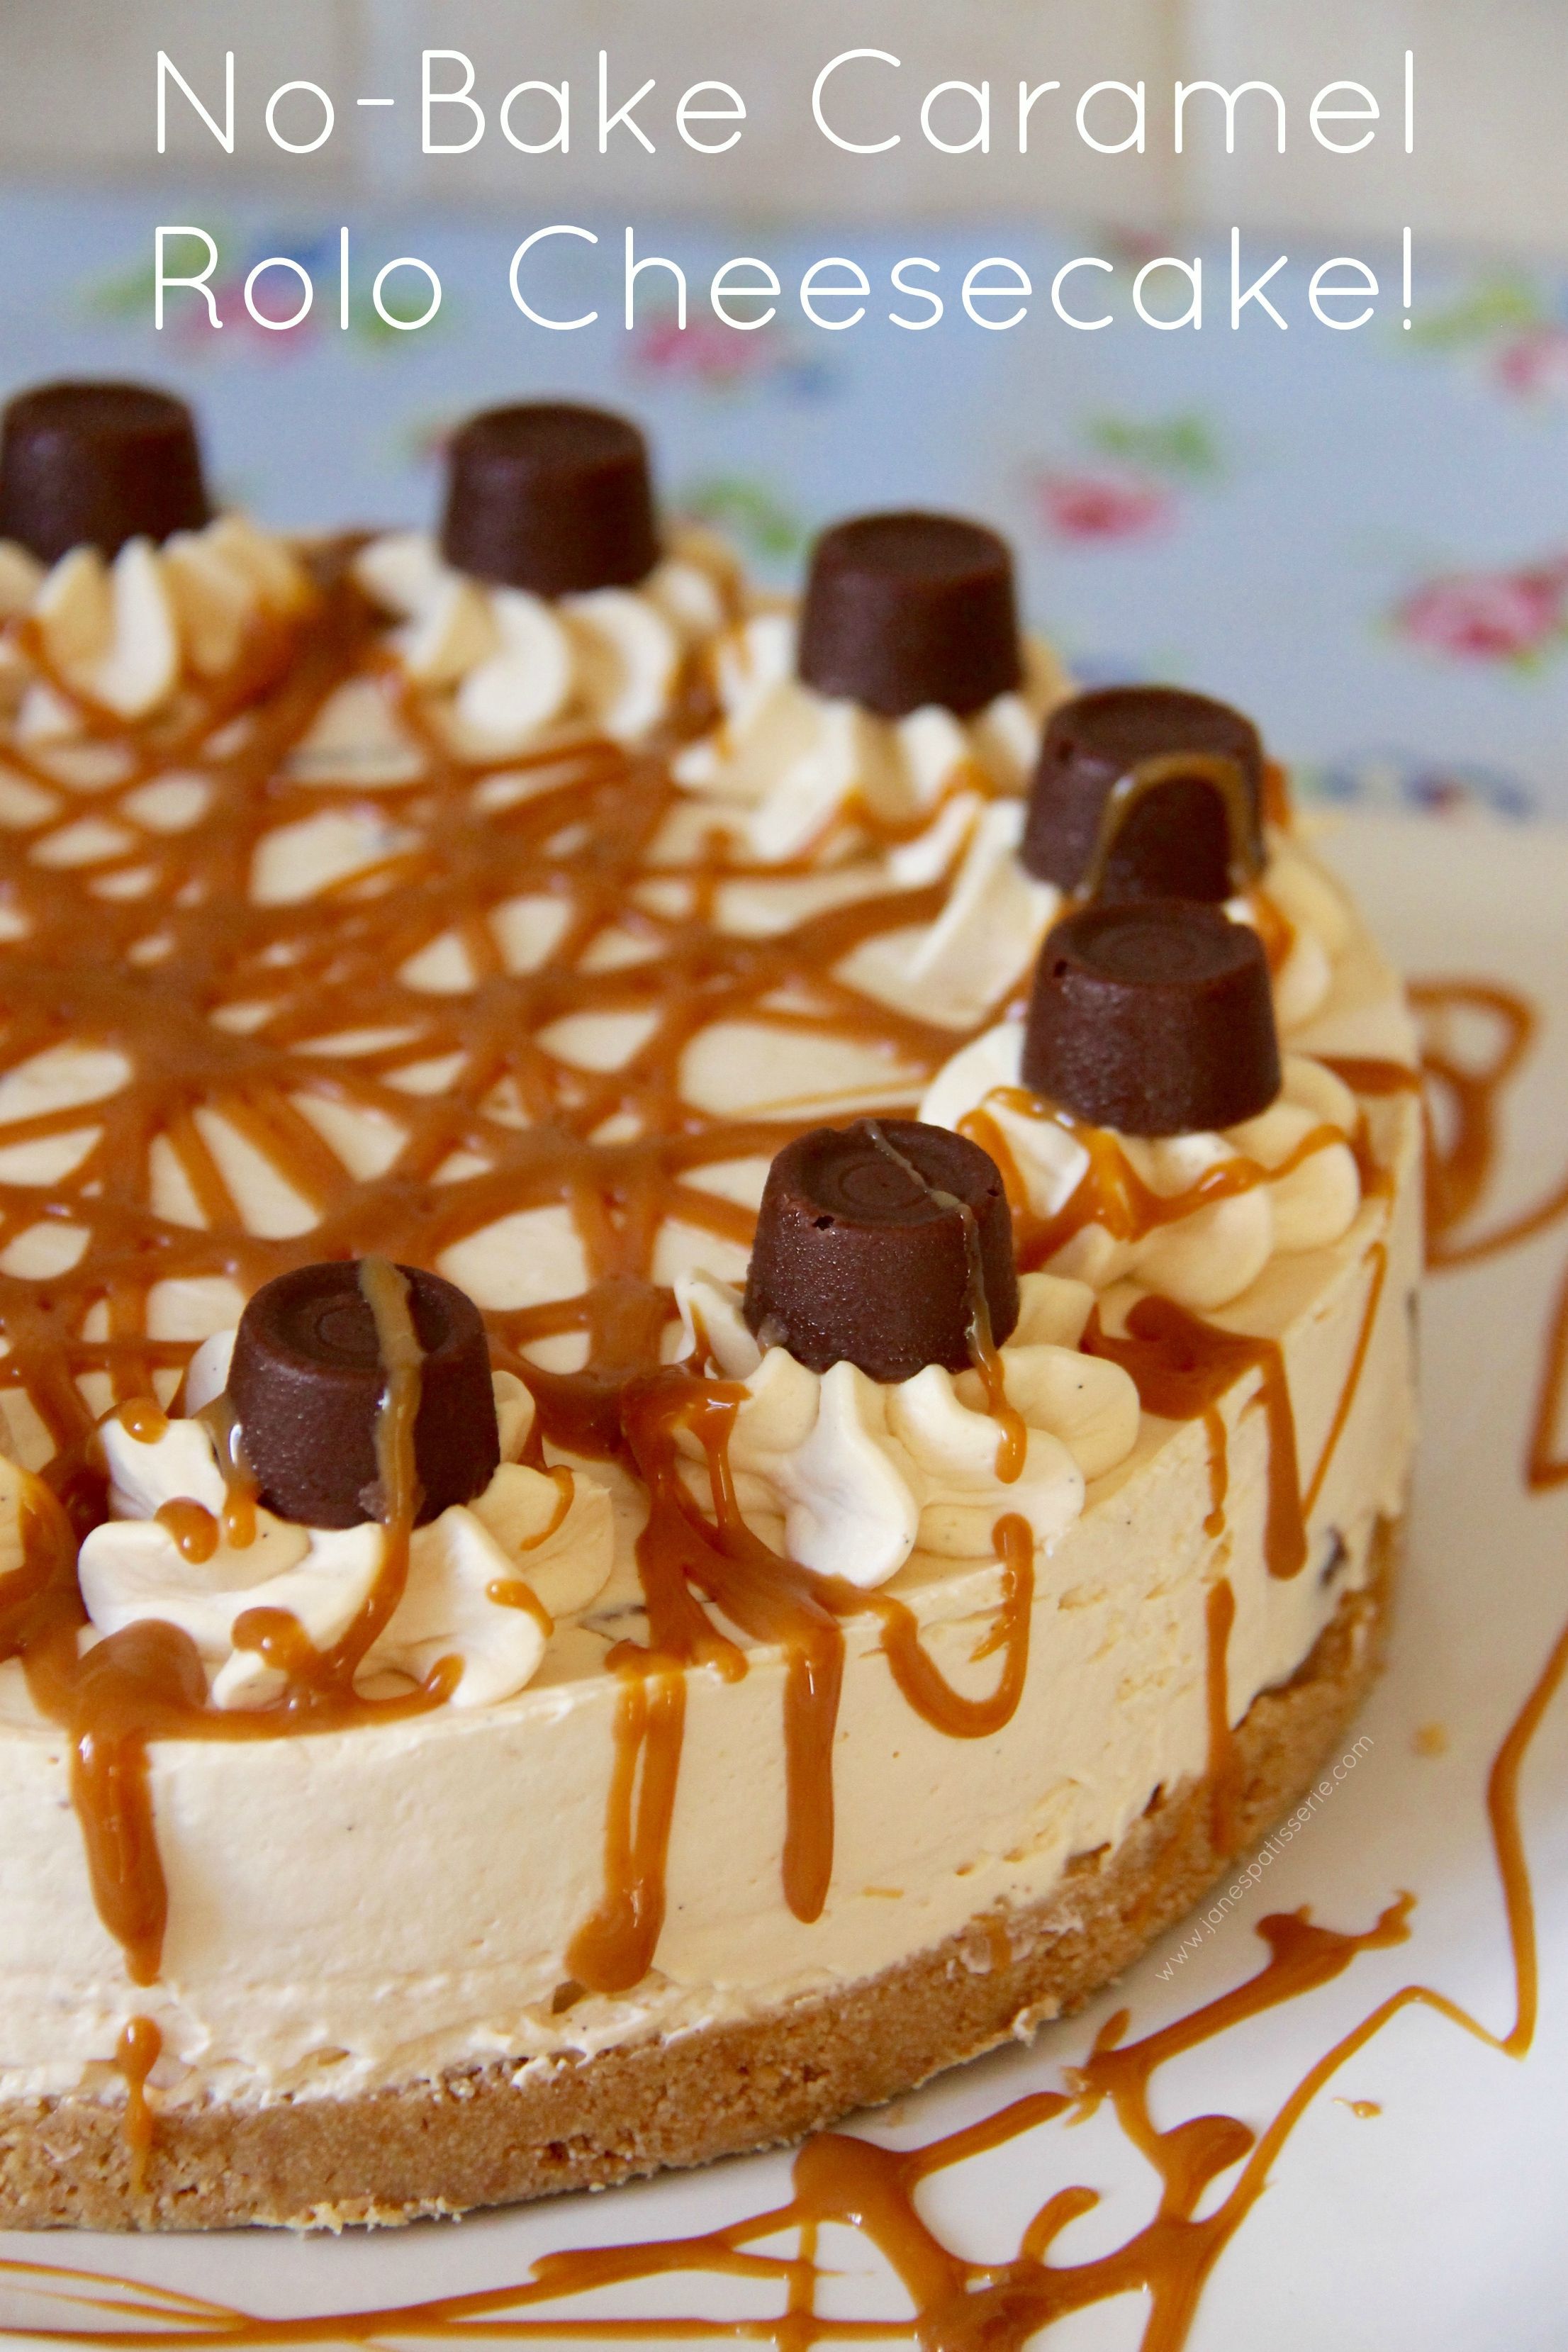 NO-BAKE CARAMEL ROLO CHEESECAKE – Caramel creamy cheesecake filling on top of a delicious buttery biscuit base drizzled with an